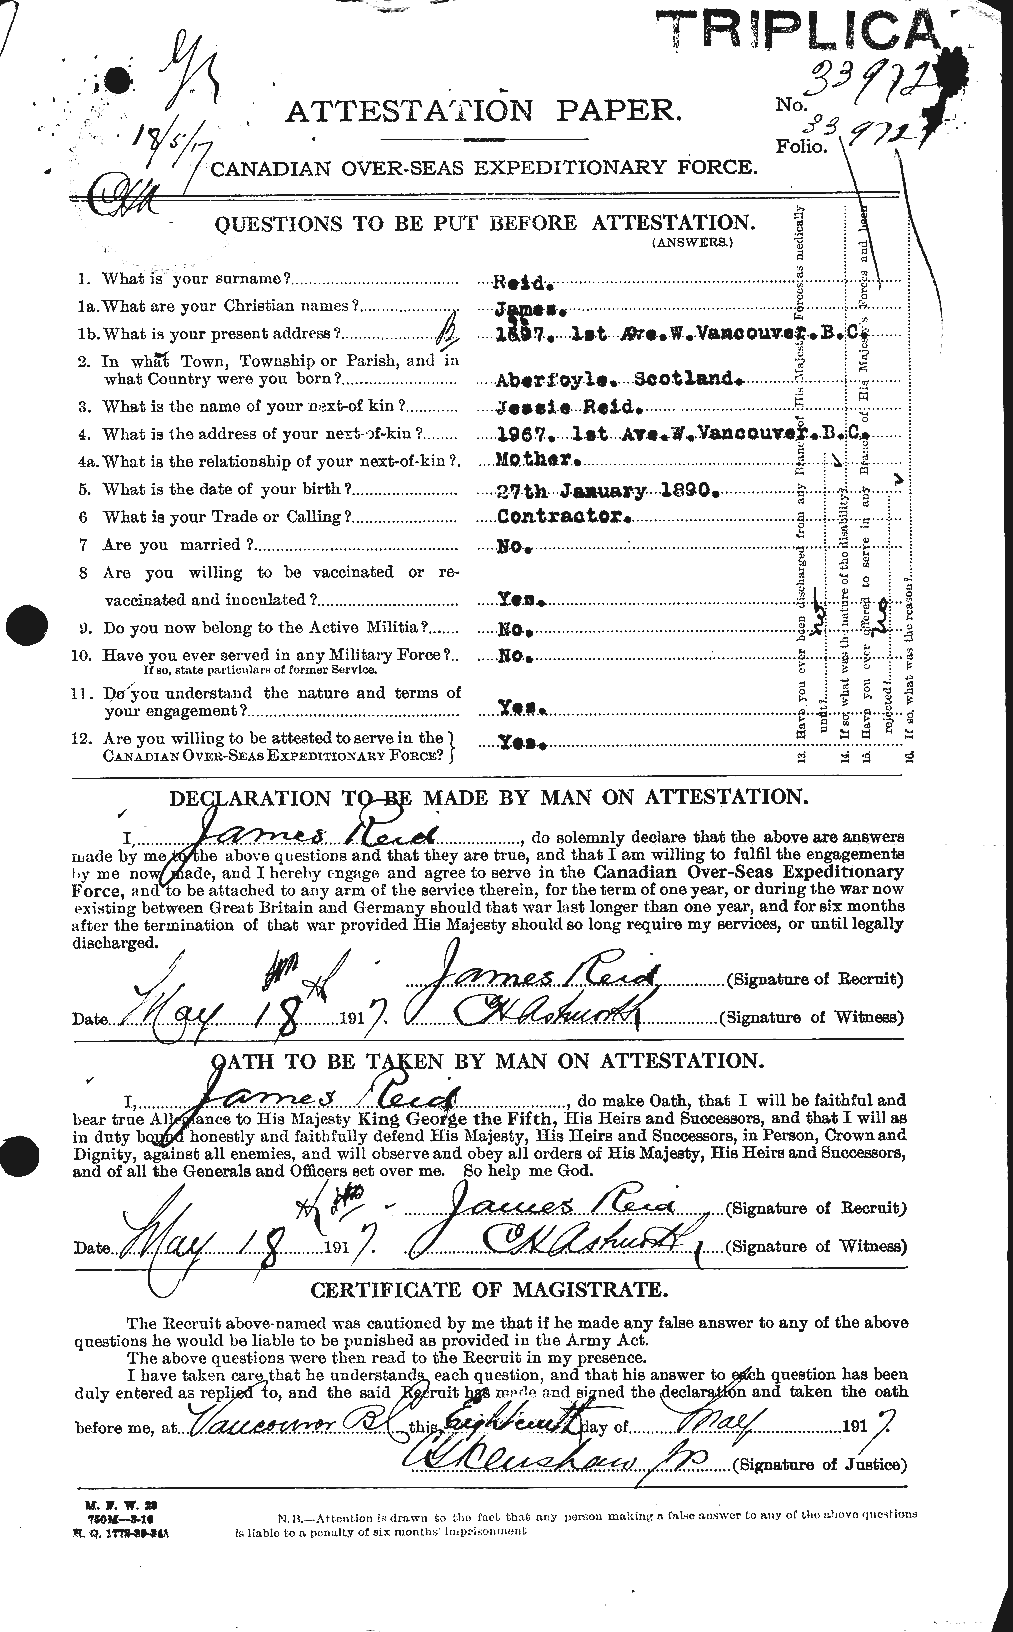 Personnel Records of the First World War - CEF 598661a